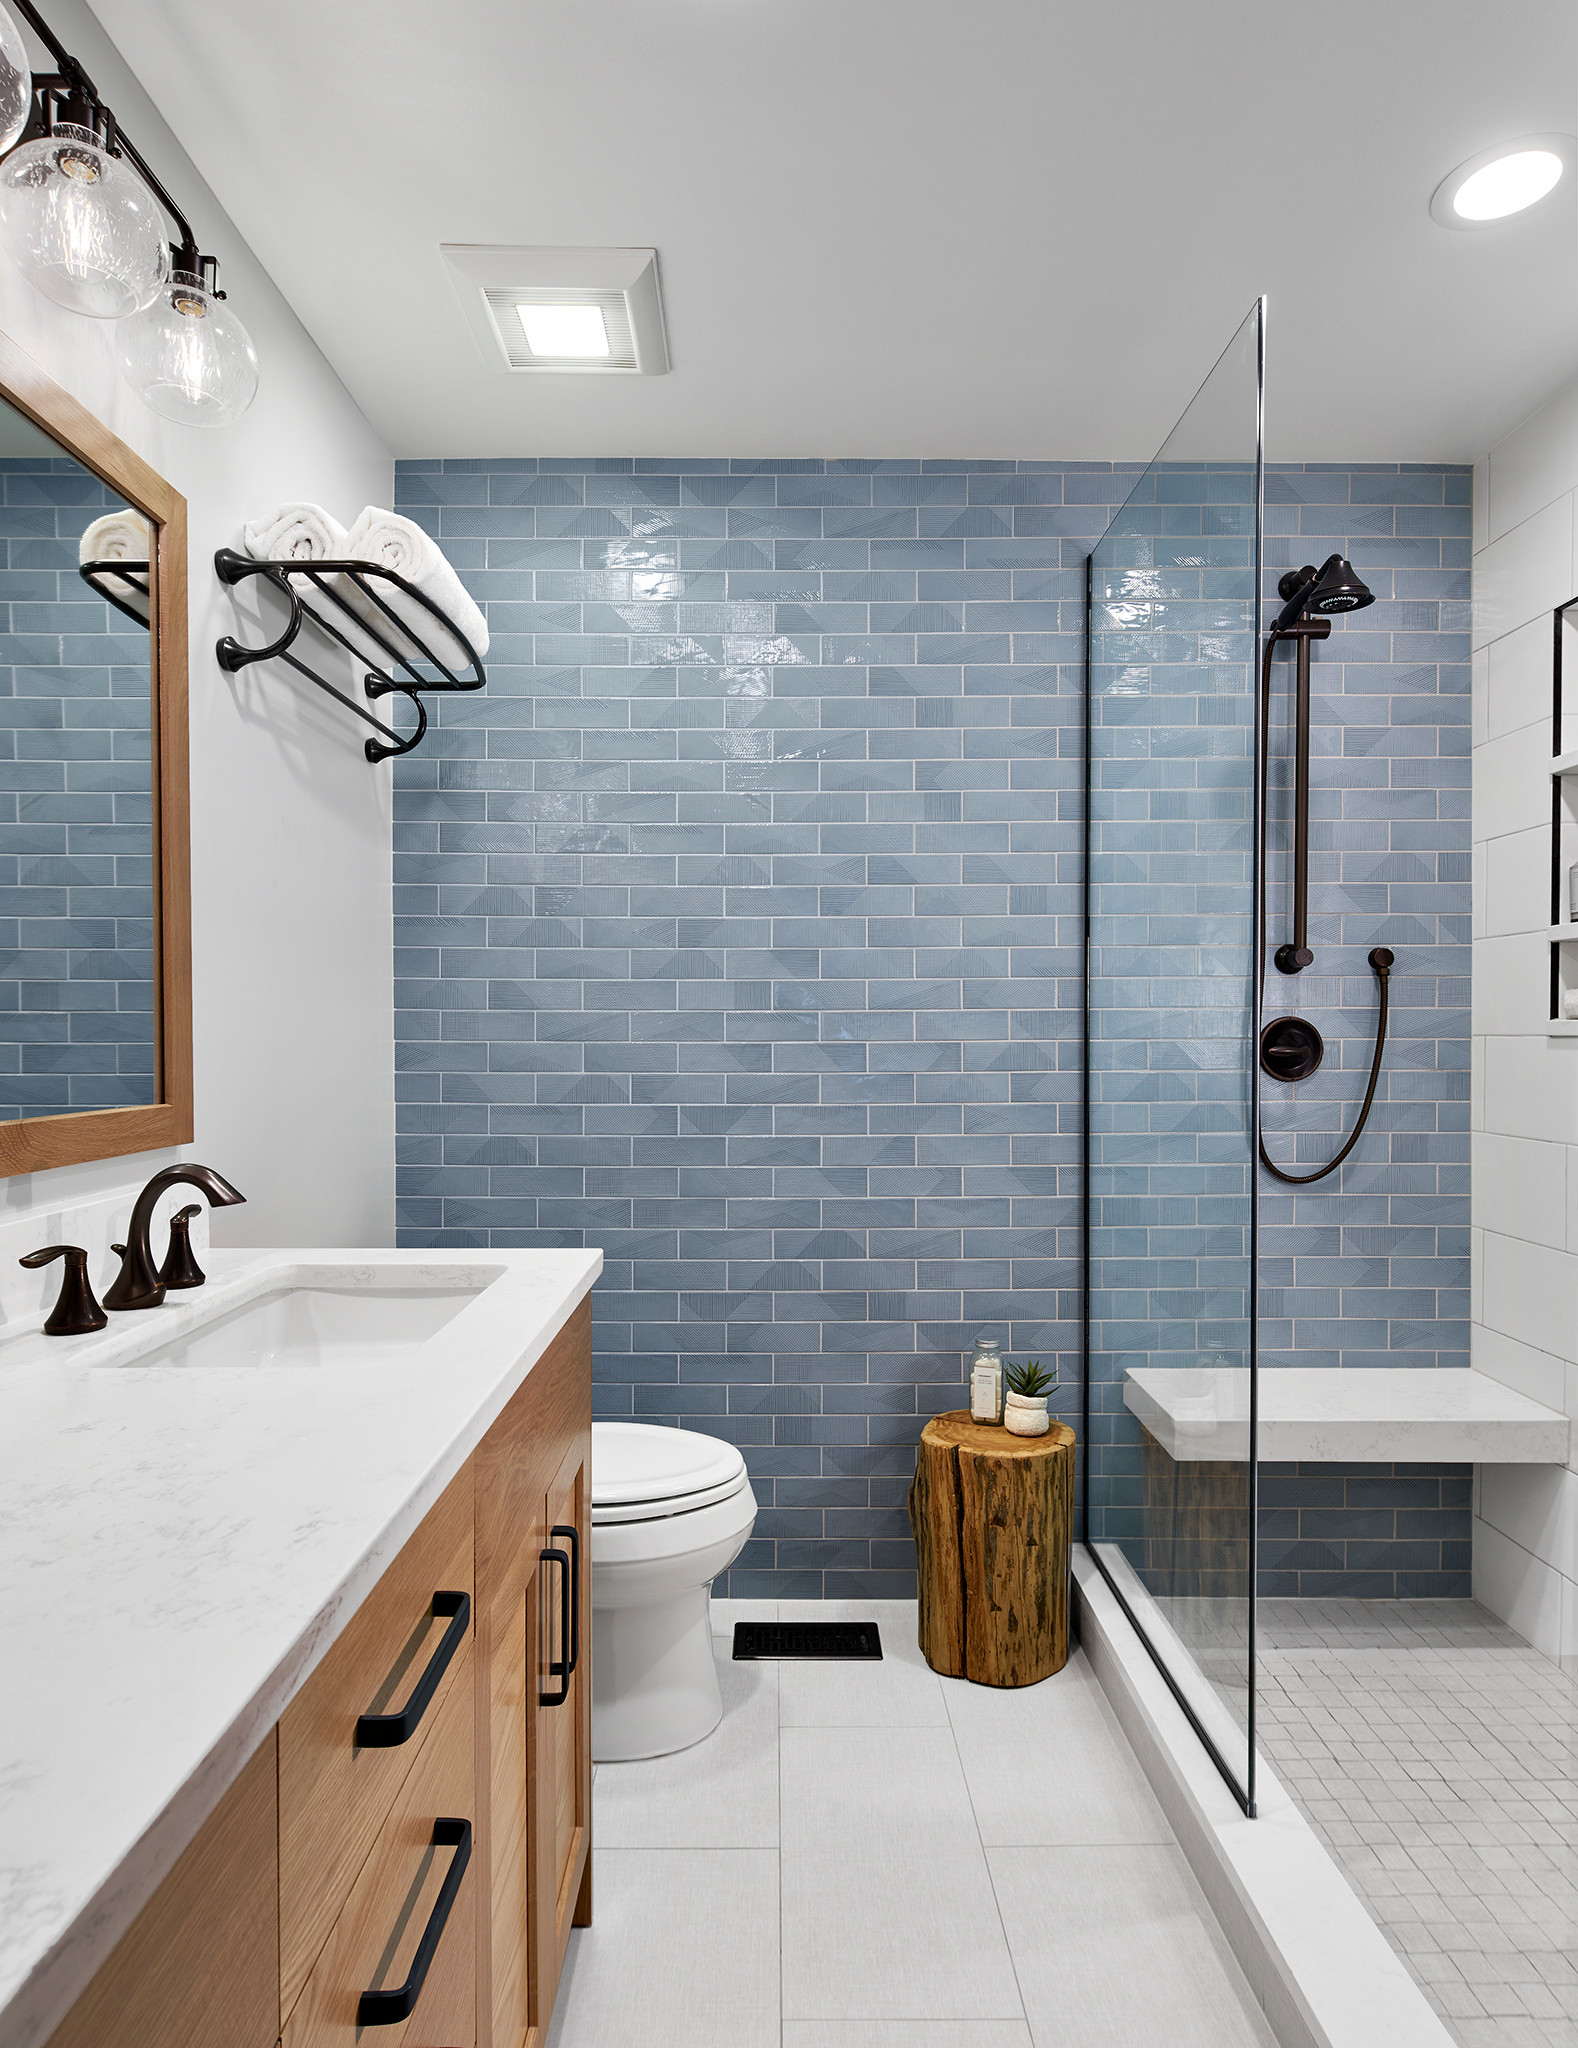 75 Bathroom Pictures & Ideas You'Ll Love - March, 2022